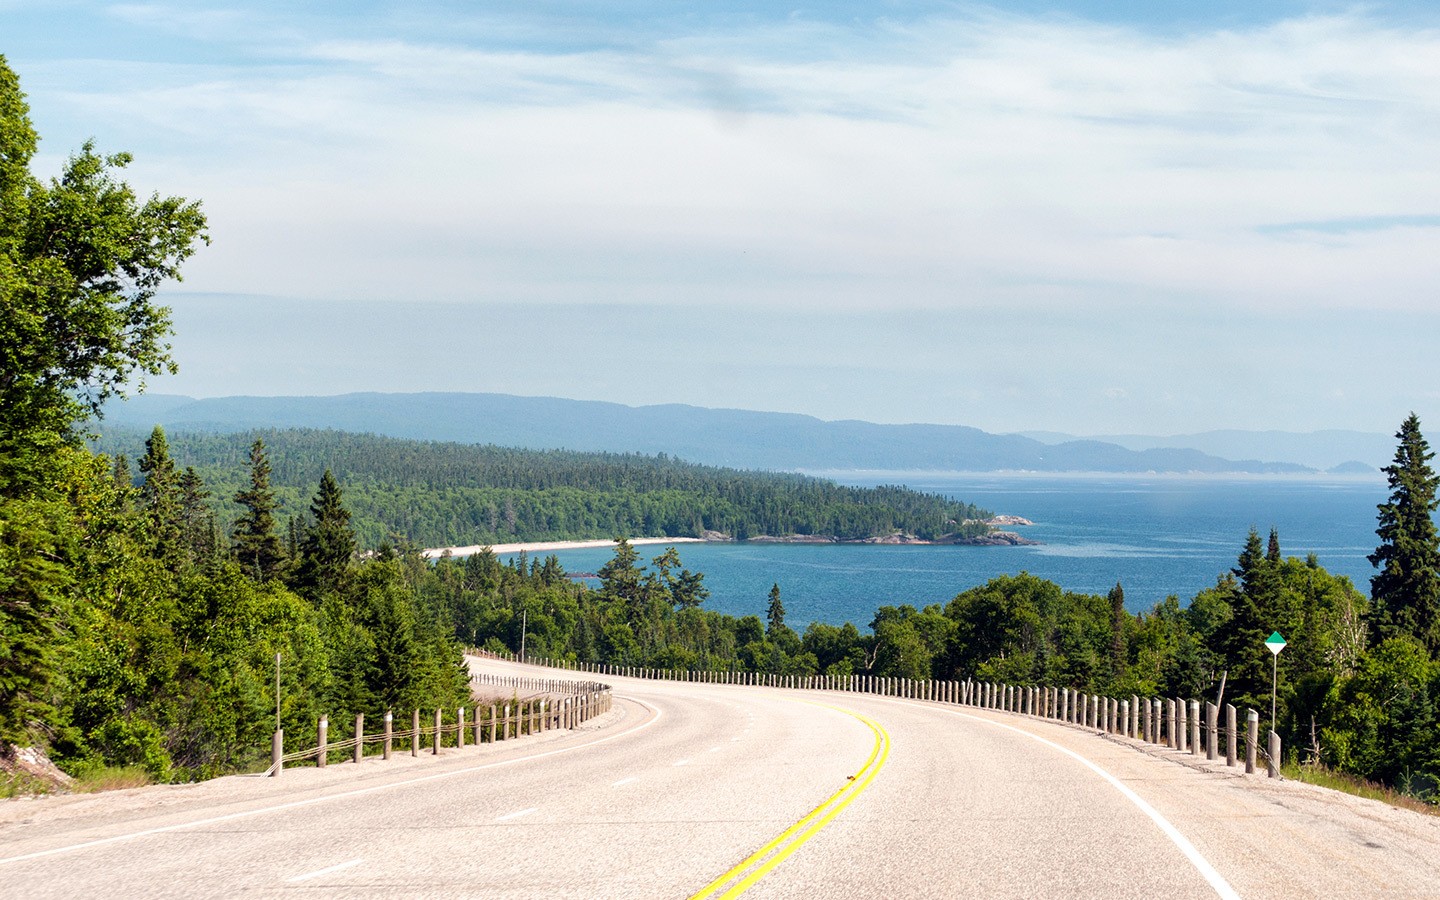 Views of the road to Lake Superior